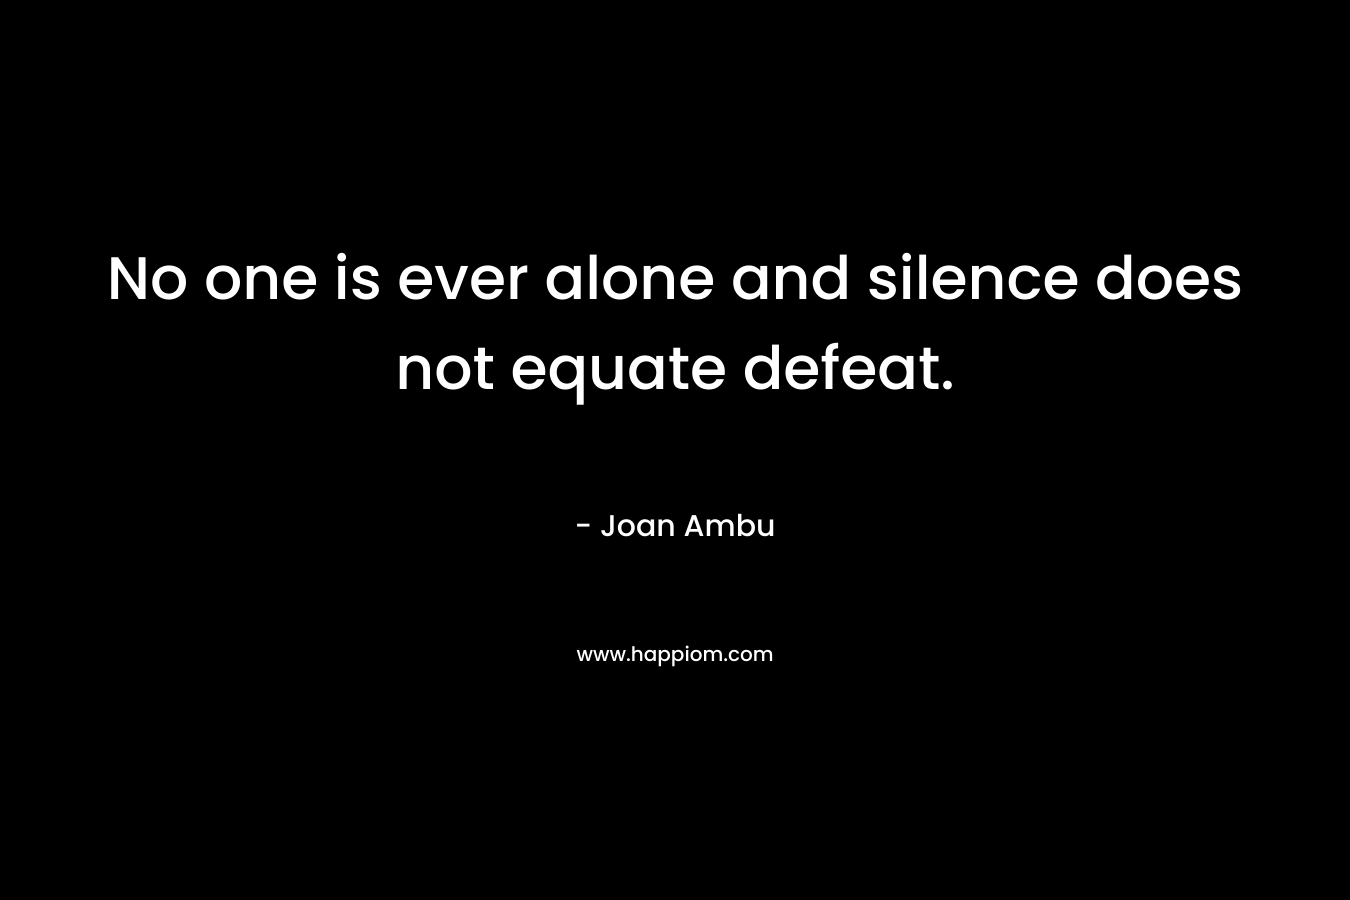 No one is ever alone and silence does not equate defeat.